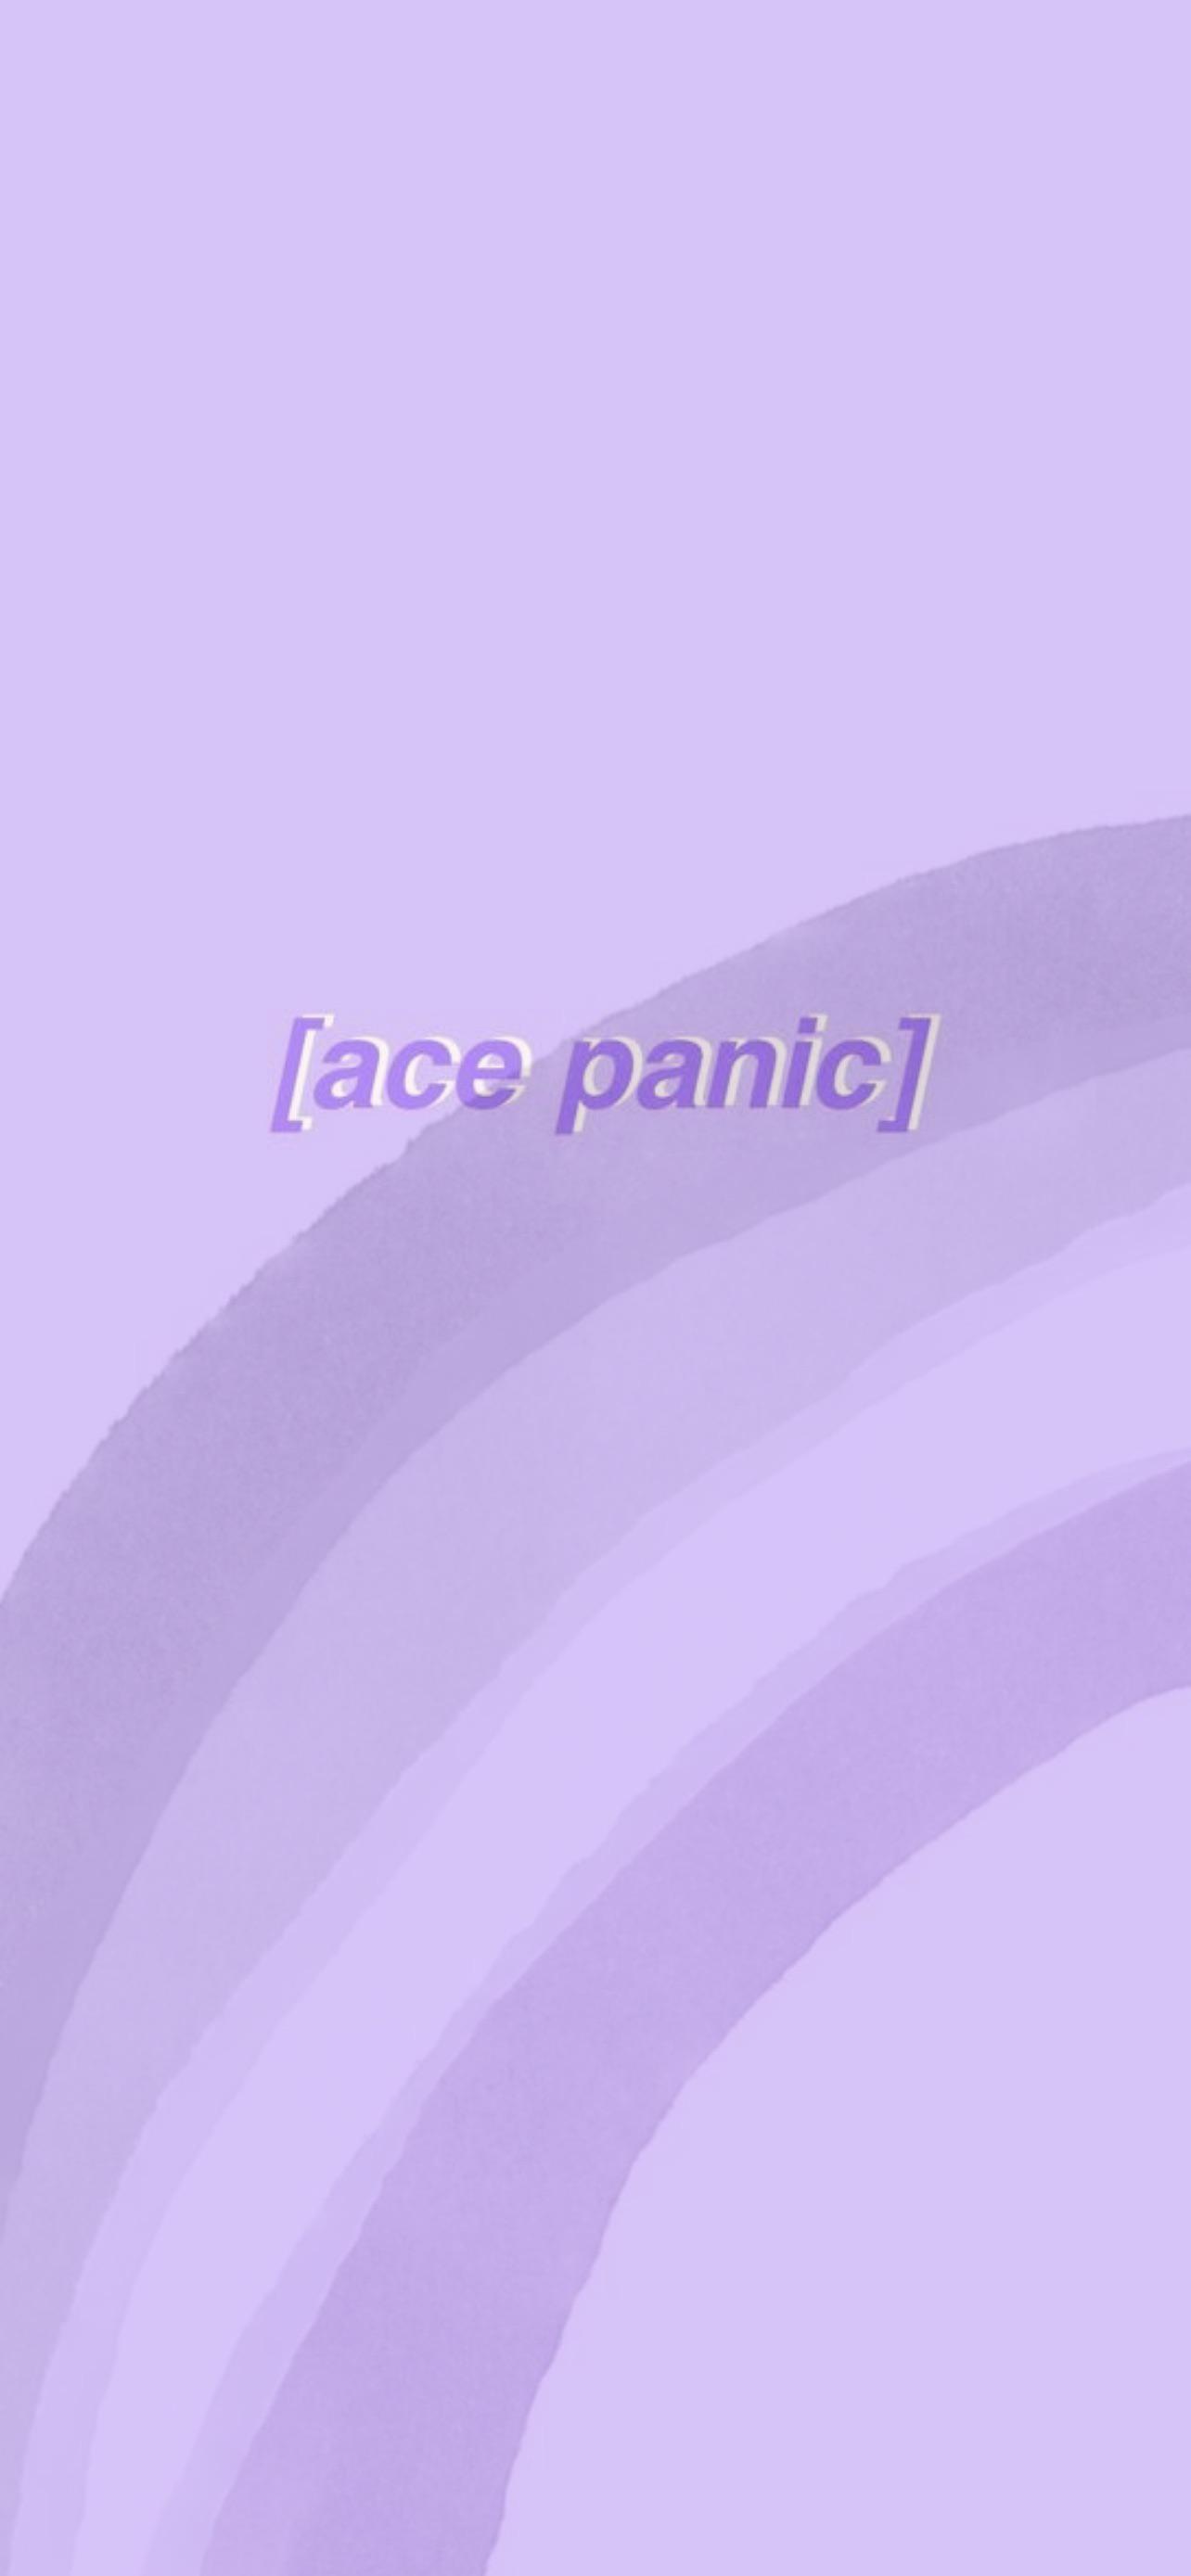 Ace panic phone background - Asexual